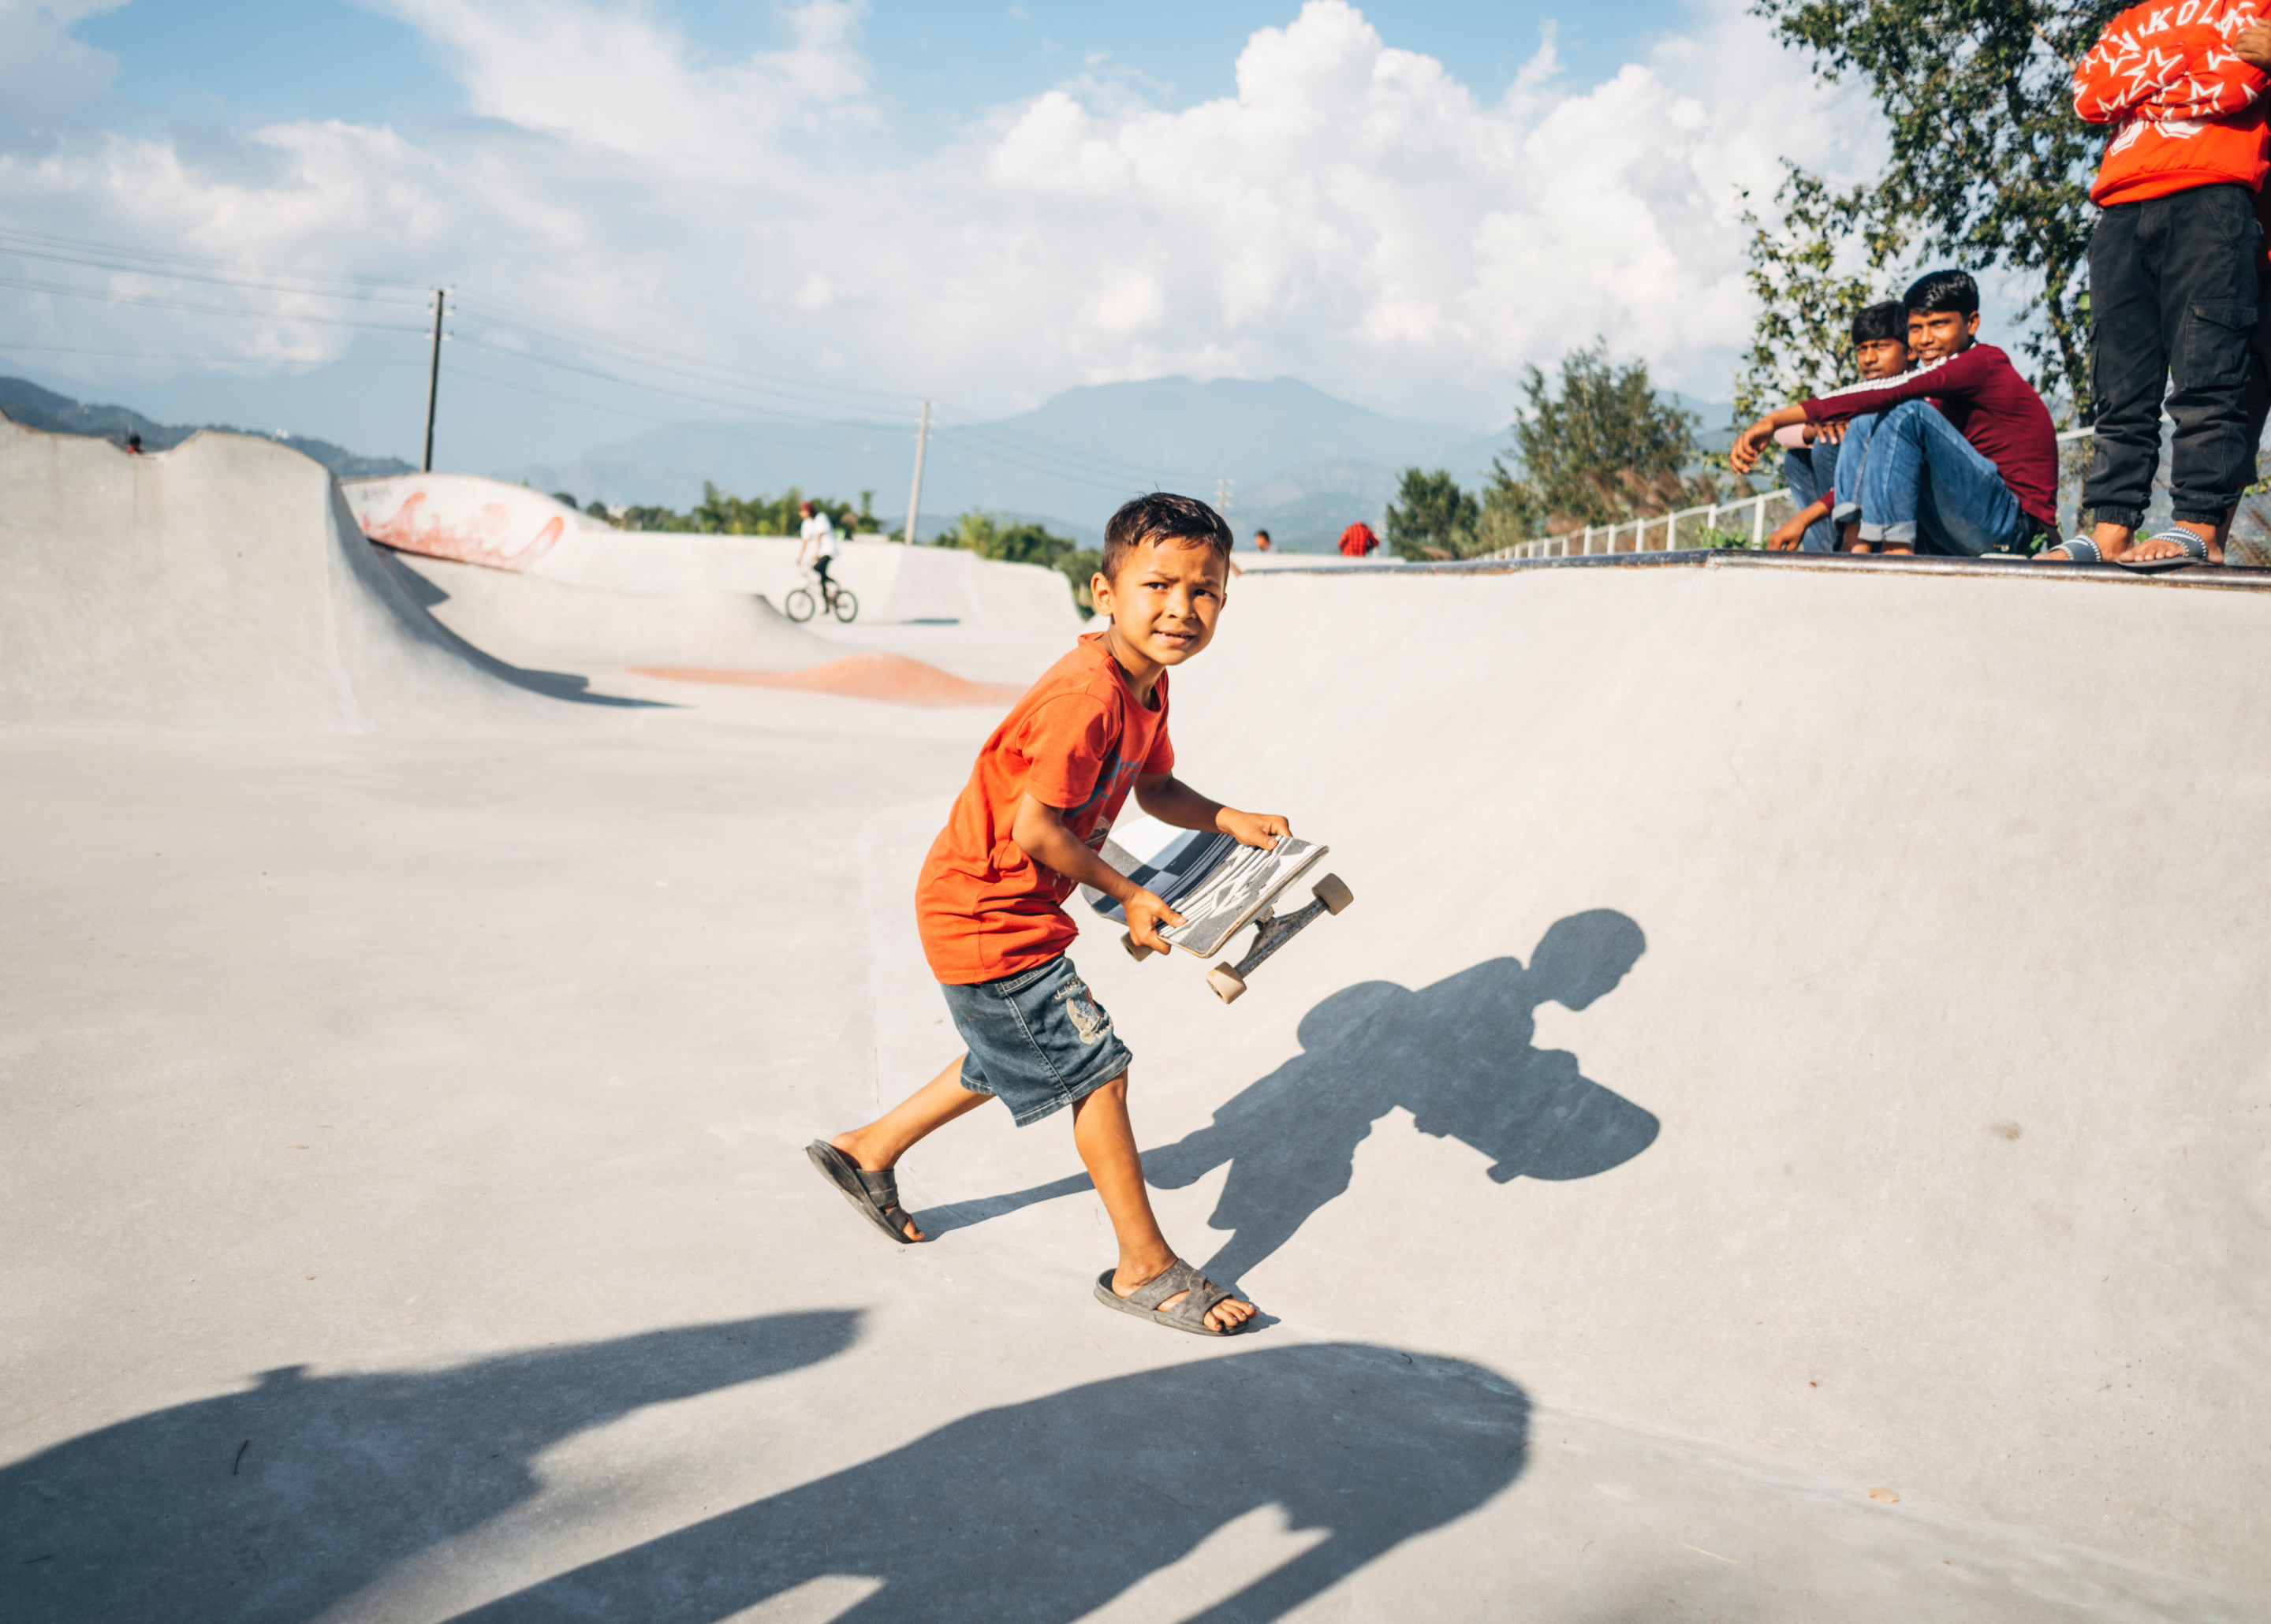 A young child holding a skateboard in a skateboard ramp.